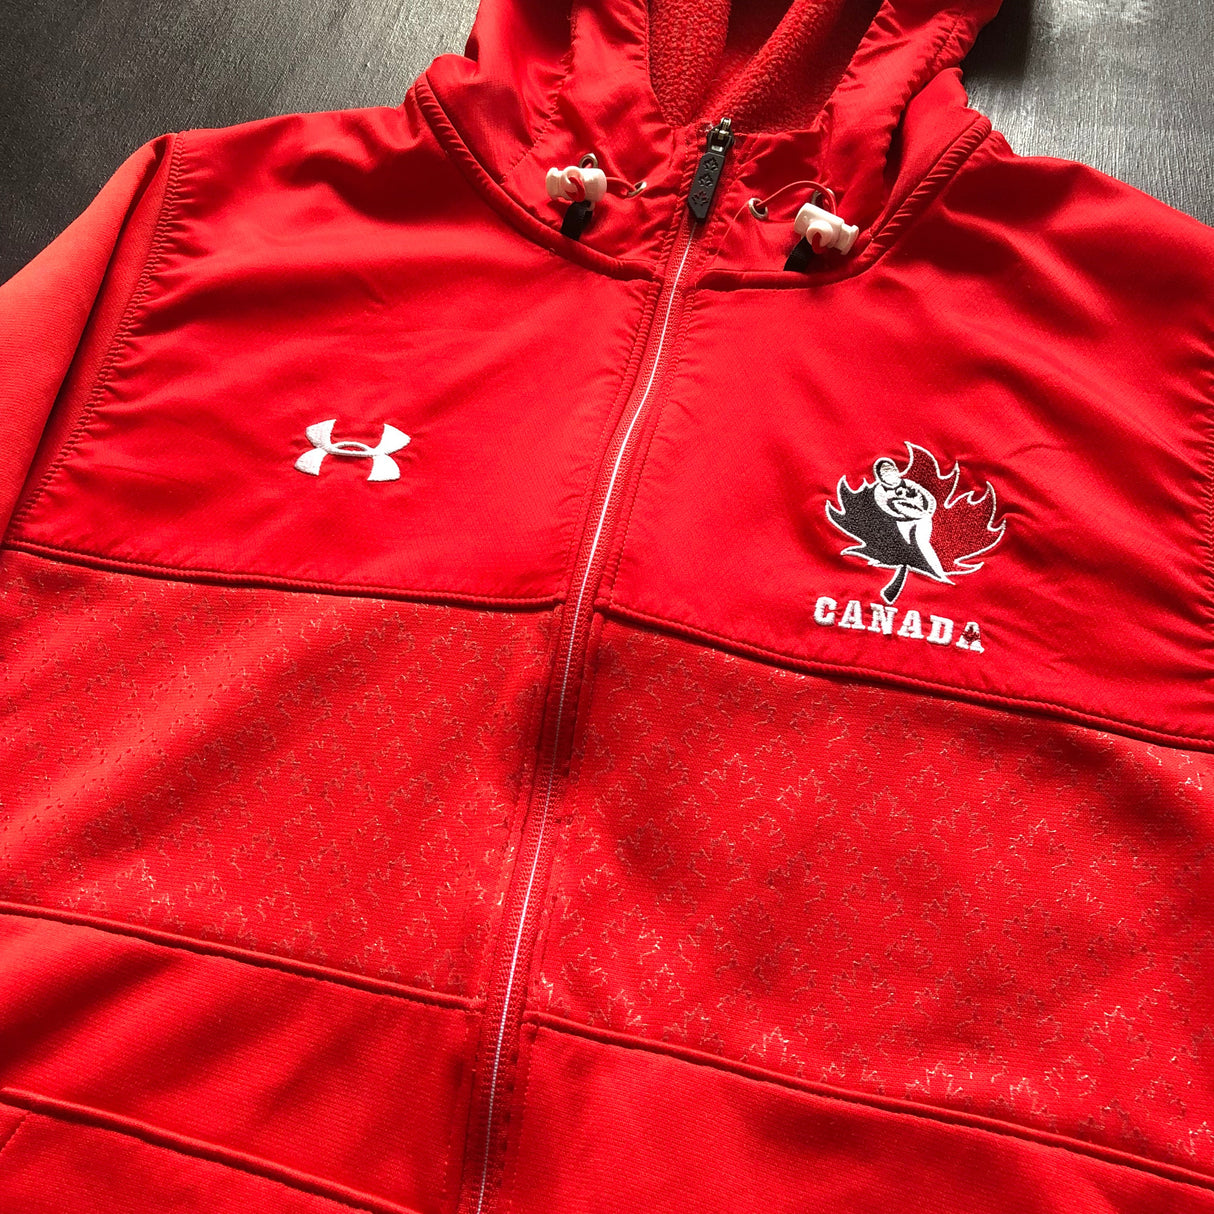 Canada National Rugby Team Hooded Jacket Medium Underdog Rugby - The Tier 2 Rugby Shop 